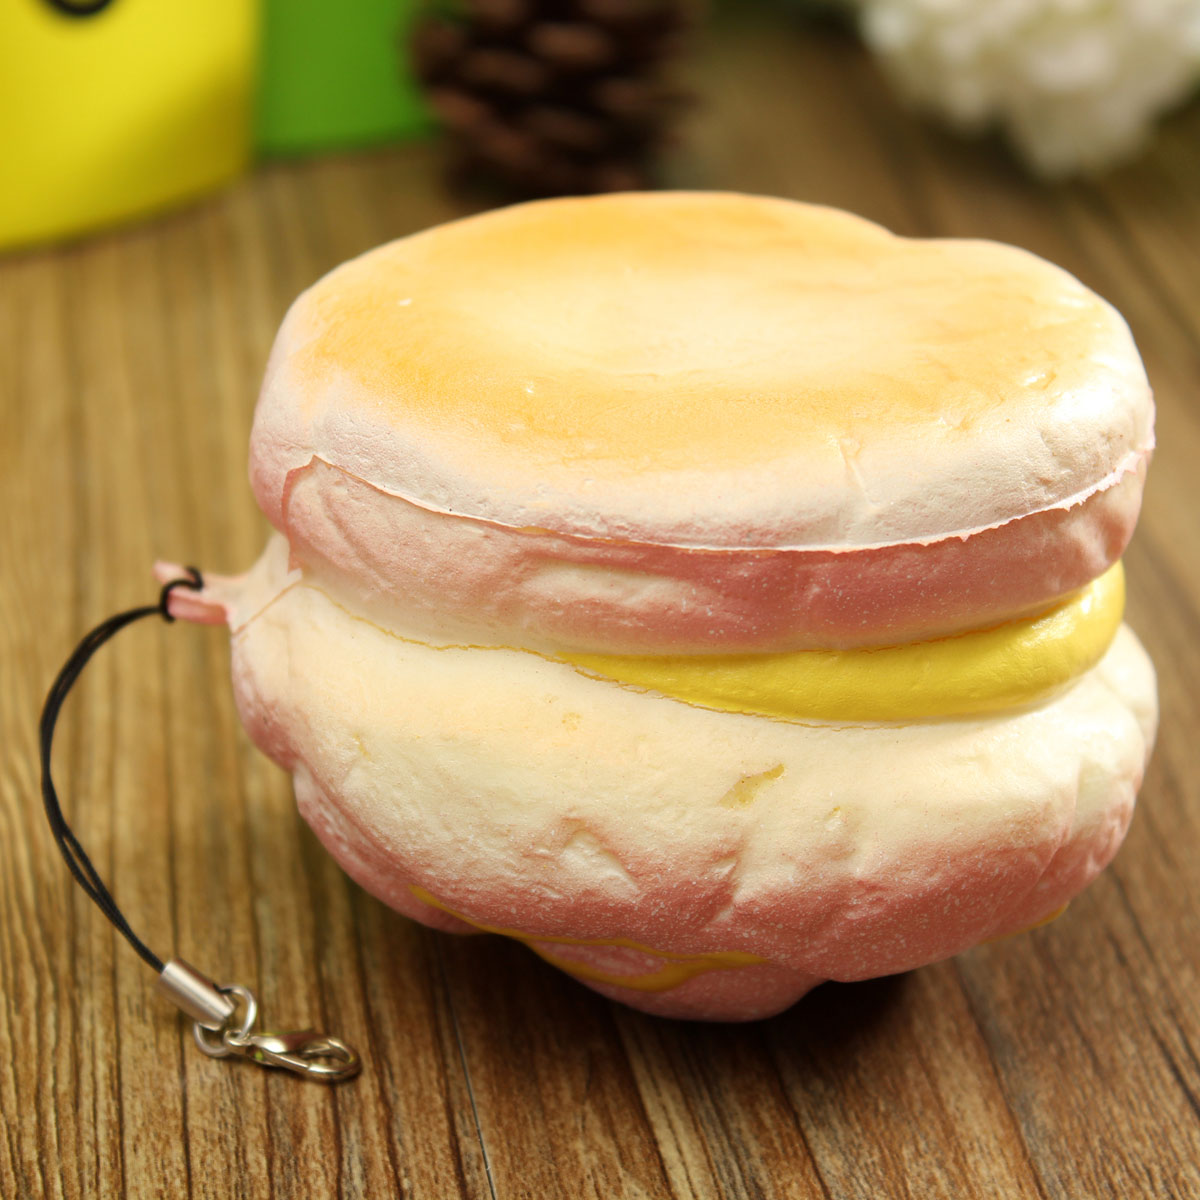 Squishy-Cell-Phone-Charms-Soft-Cream-Bread-Bag-Straps-Hand-Pillow-1070525-4